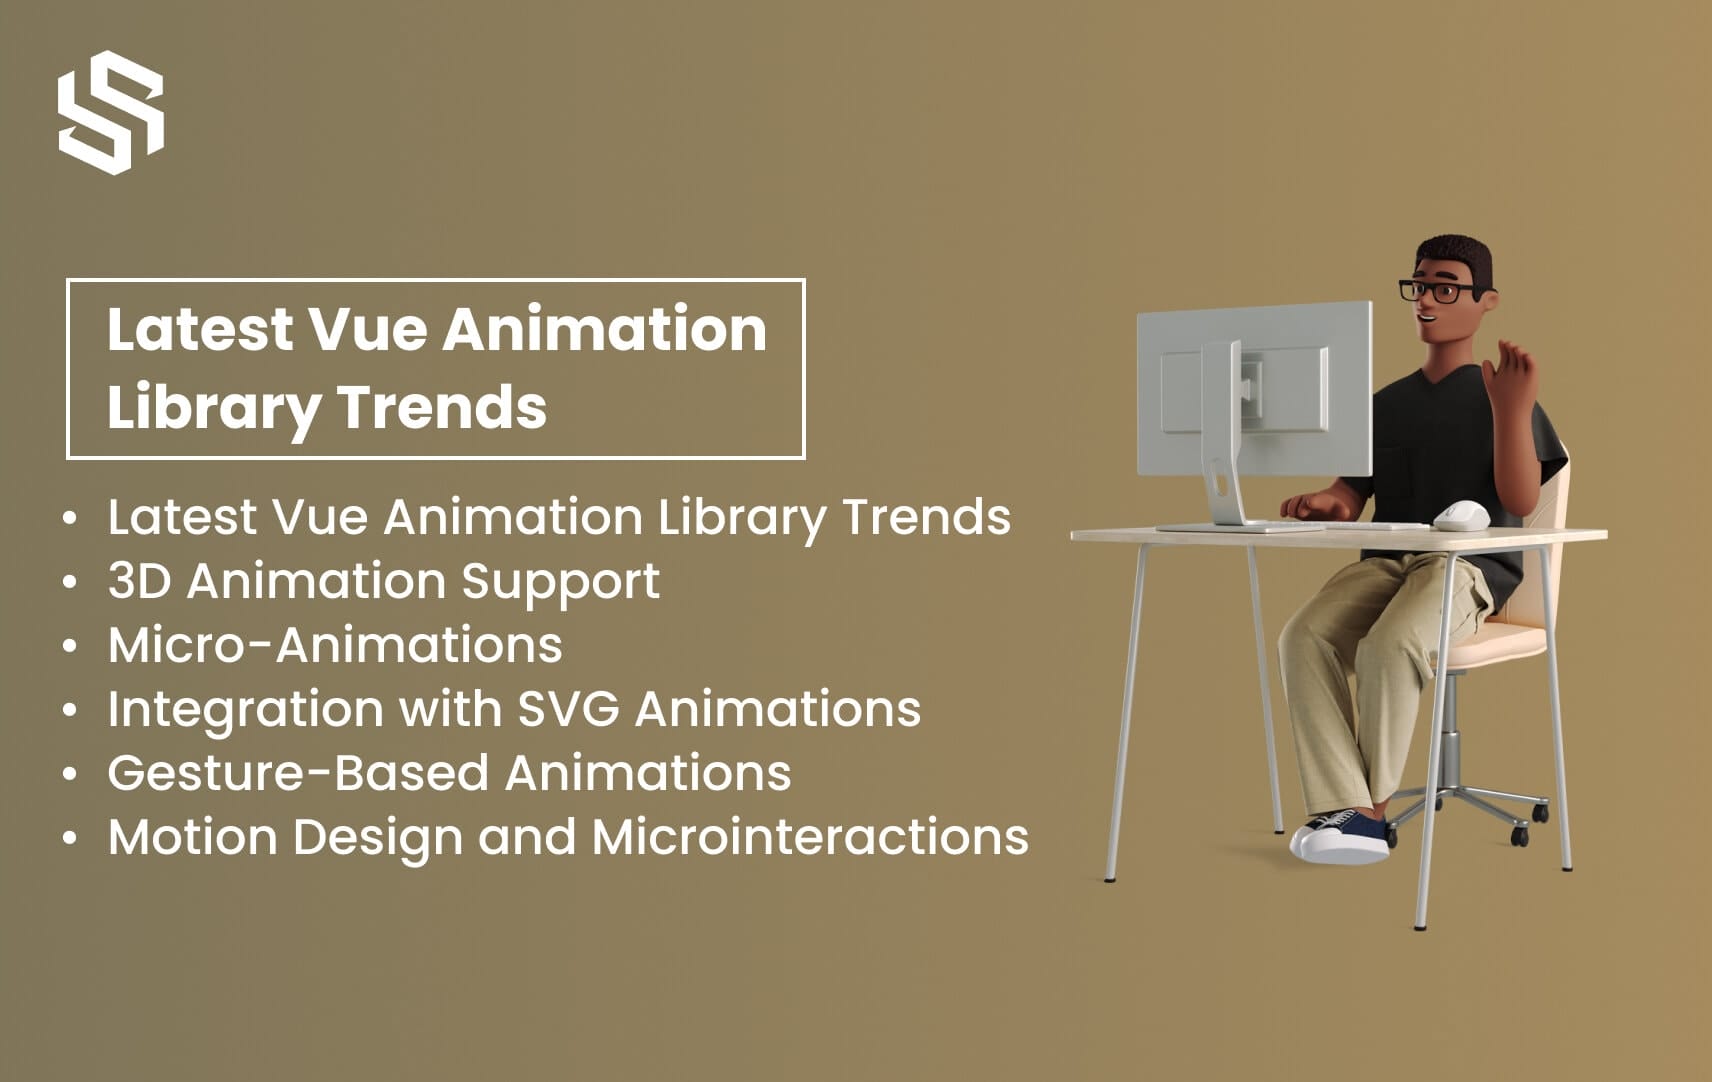 Latest Vue Animation Library Trends